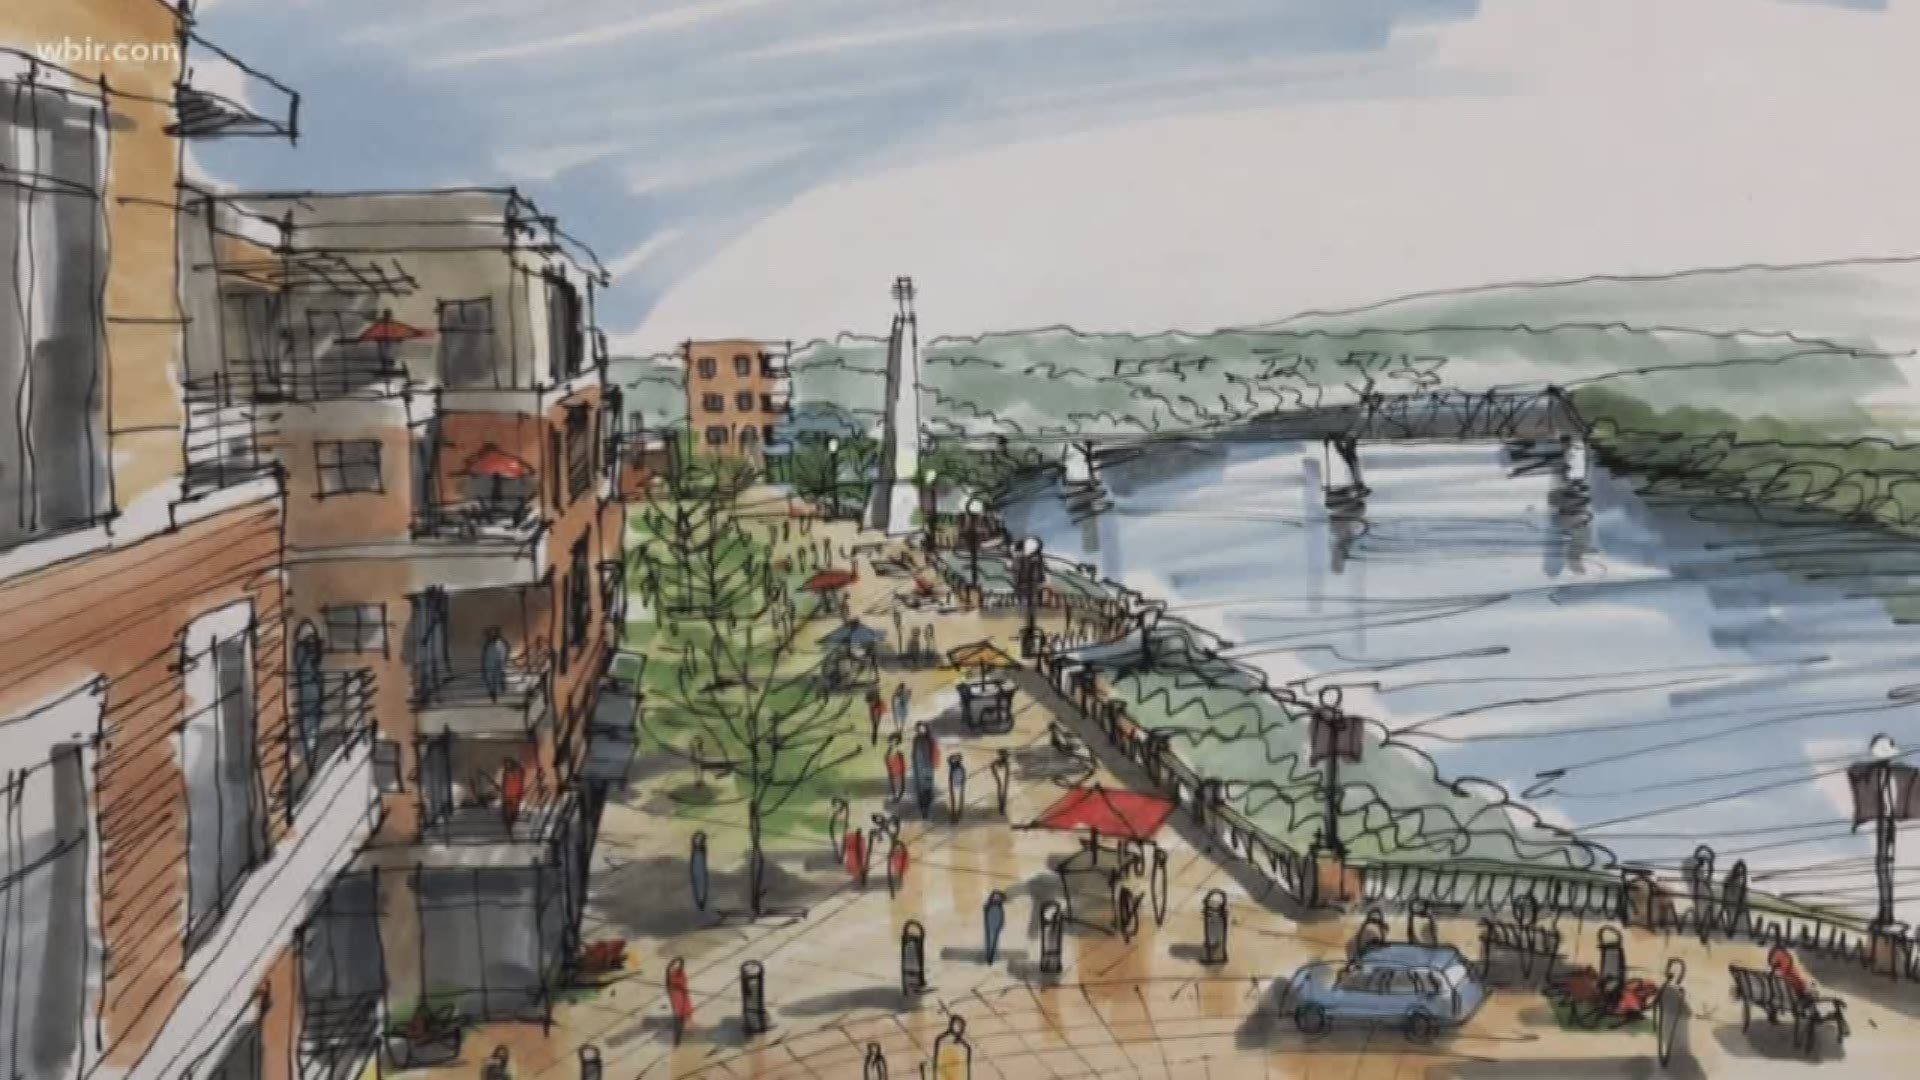 Clinton's waterfront could look very different in the next few years. The Chamber of Commerce wants to create an open space that would change downtown drastically.